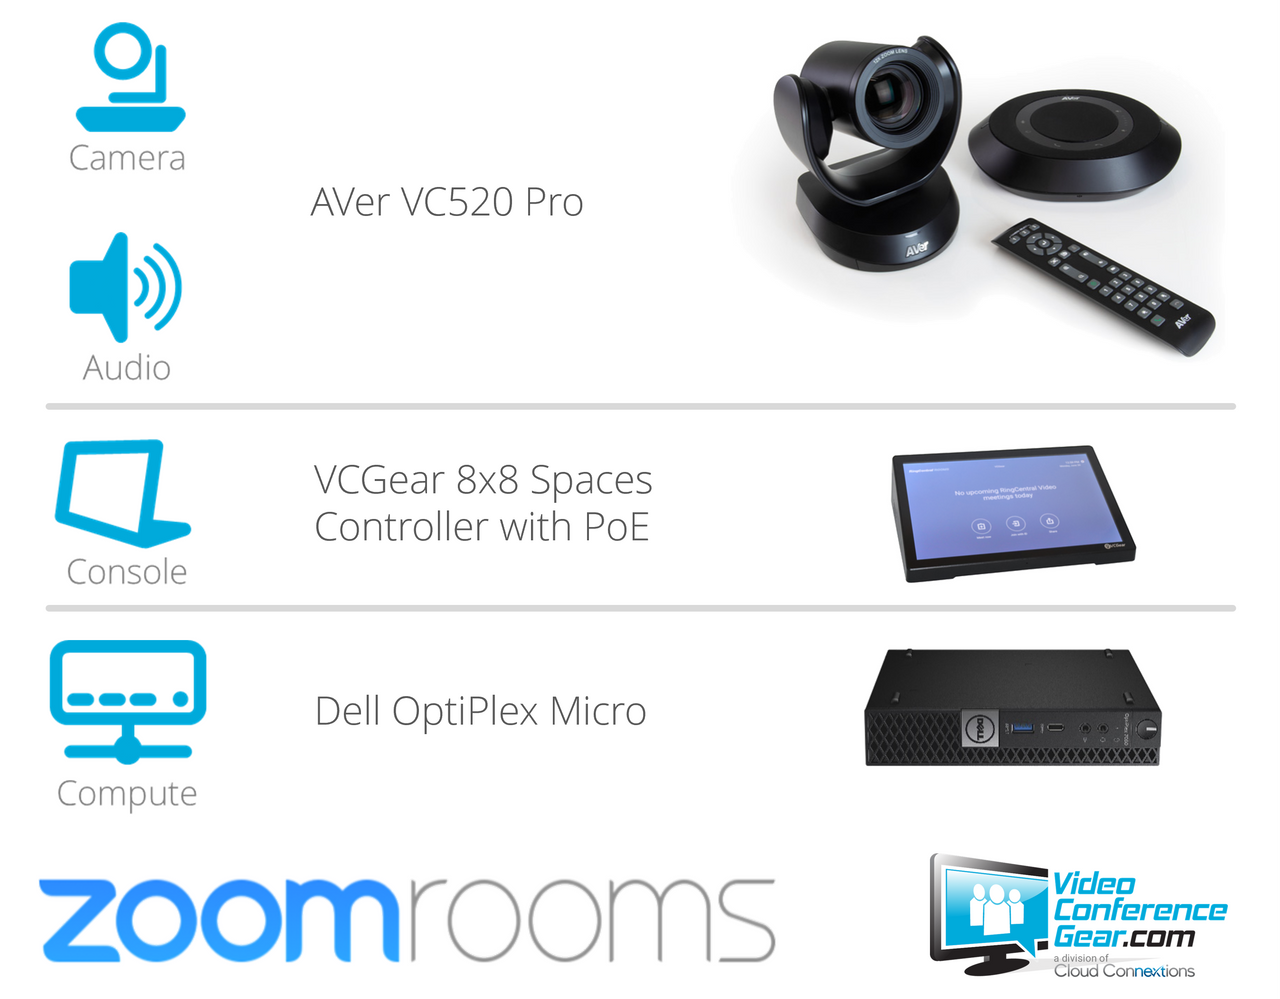 Zoom Rooms AVer VC520 Pro VCGear Room Controller Medium Room